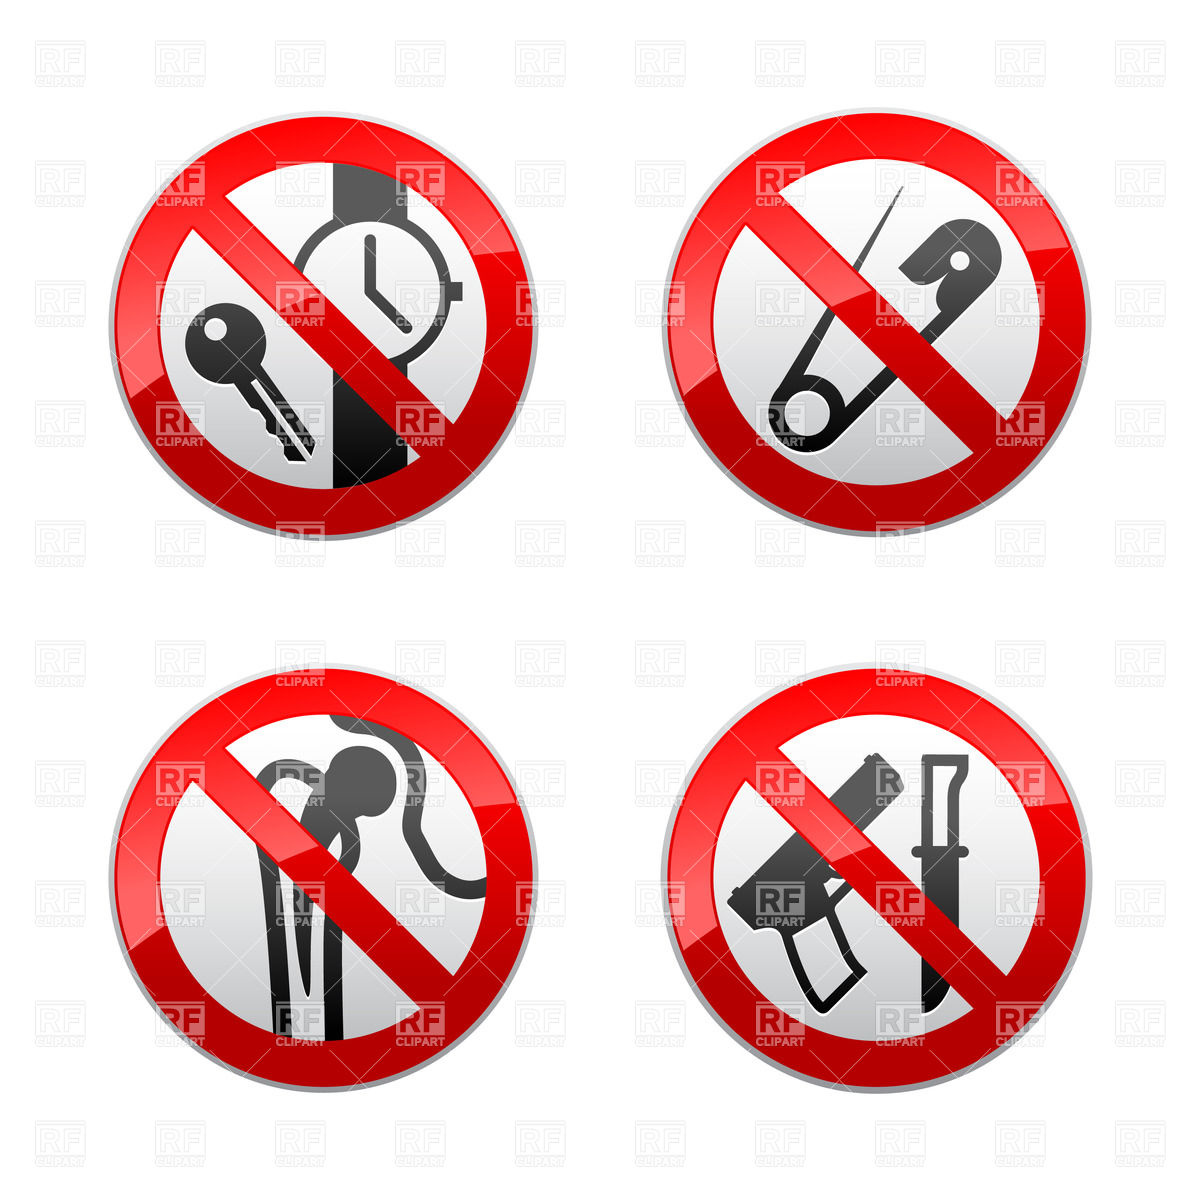 Clipart Catalog Signs Symbols Maps Prohibited Signs Metal Detector